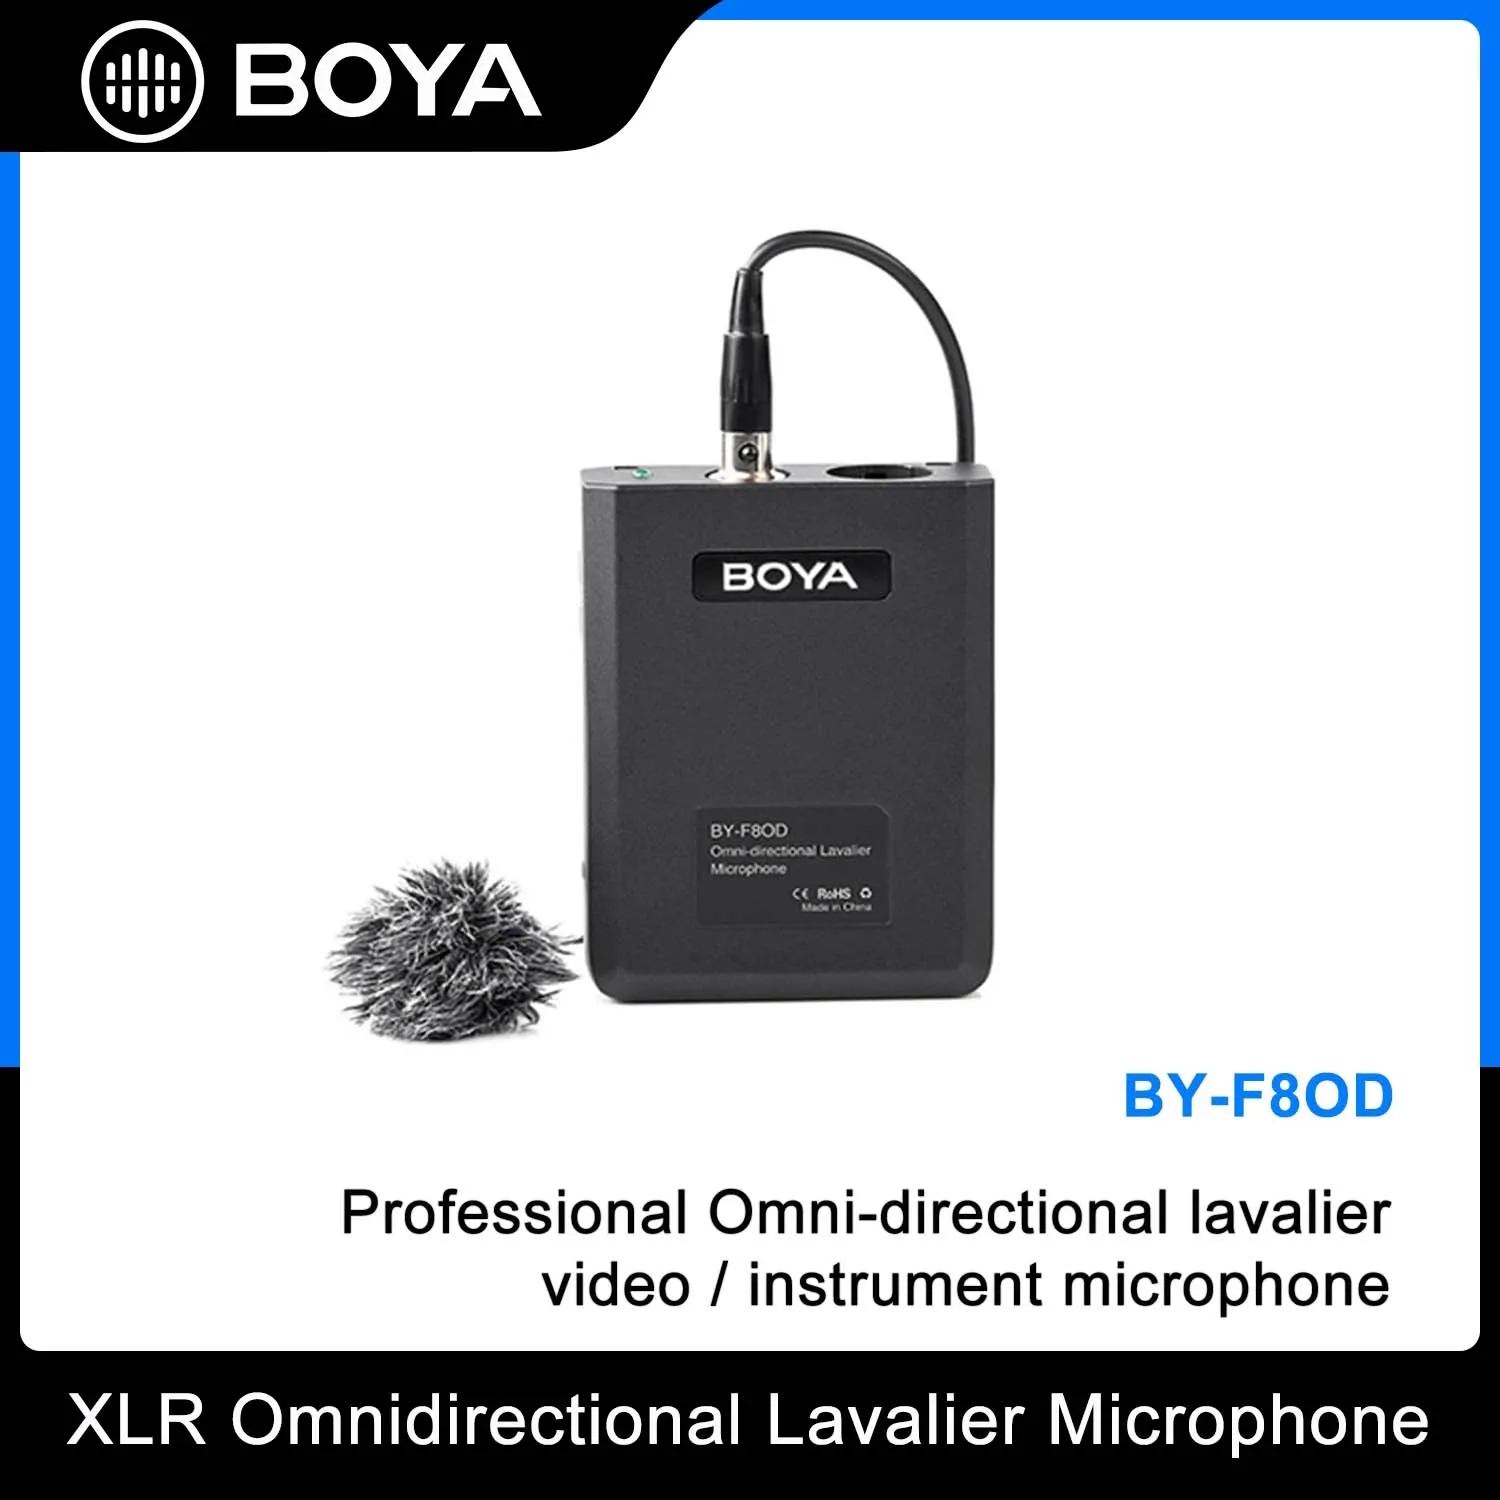 

BOYA BY-F8OD XLR Omnidirectional Lavalier Microphone for DSLR Camera Sony Panasonic Camcorder Vocal & Acoustic Guitar Video Film